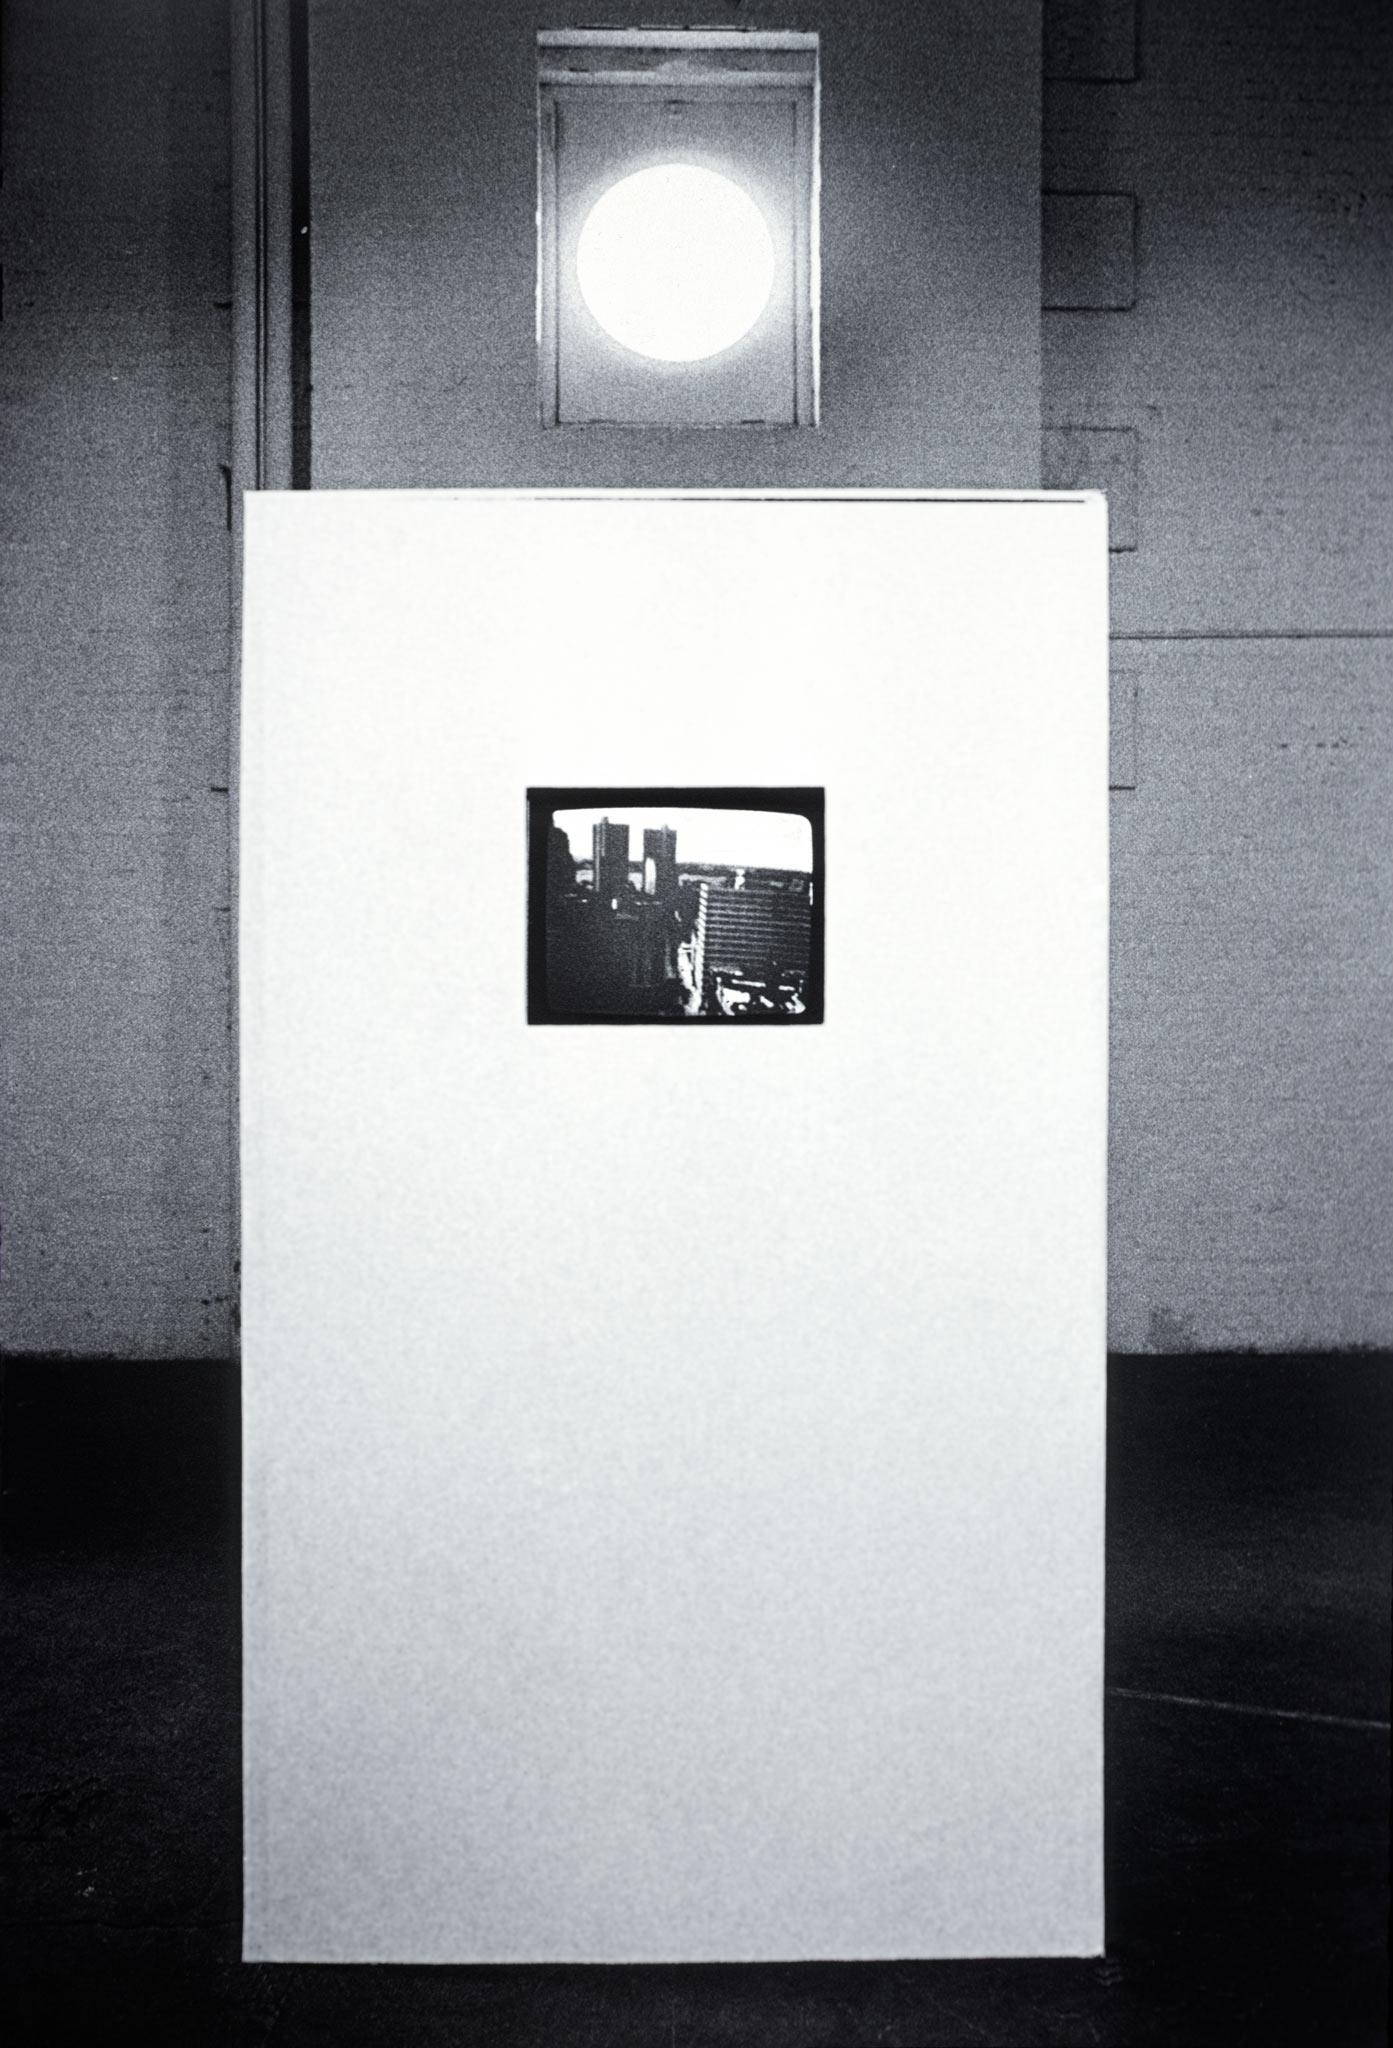 a white box with a screens embedded inside sits in the center of a white brick room with a high circular window in the background.